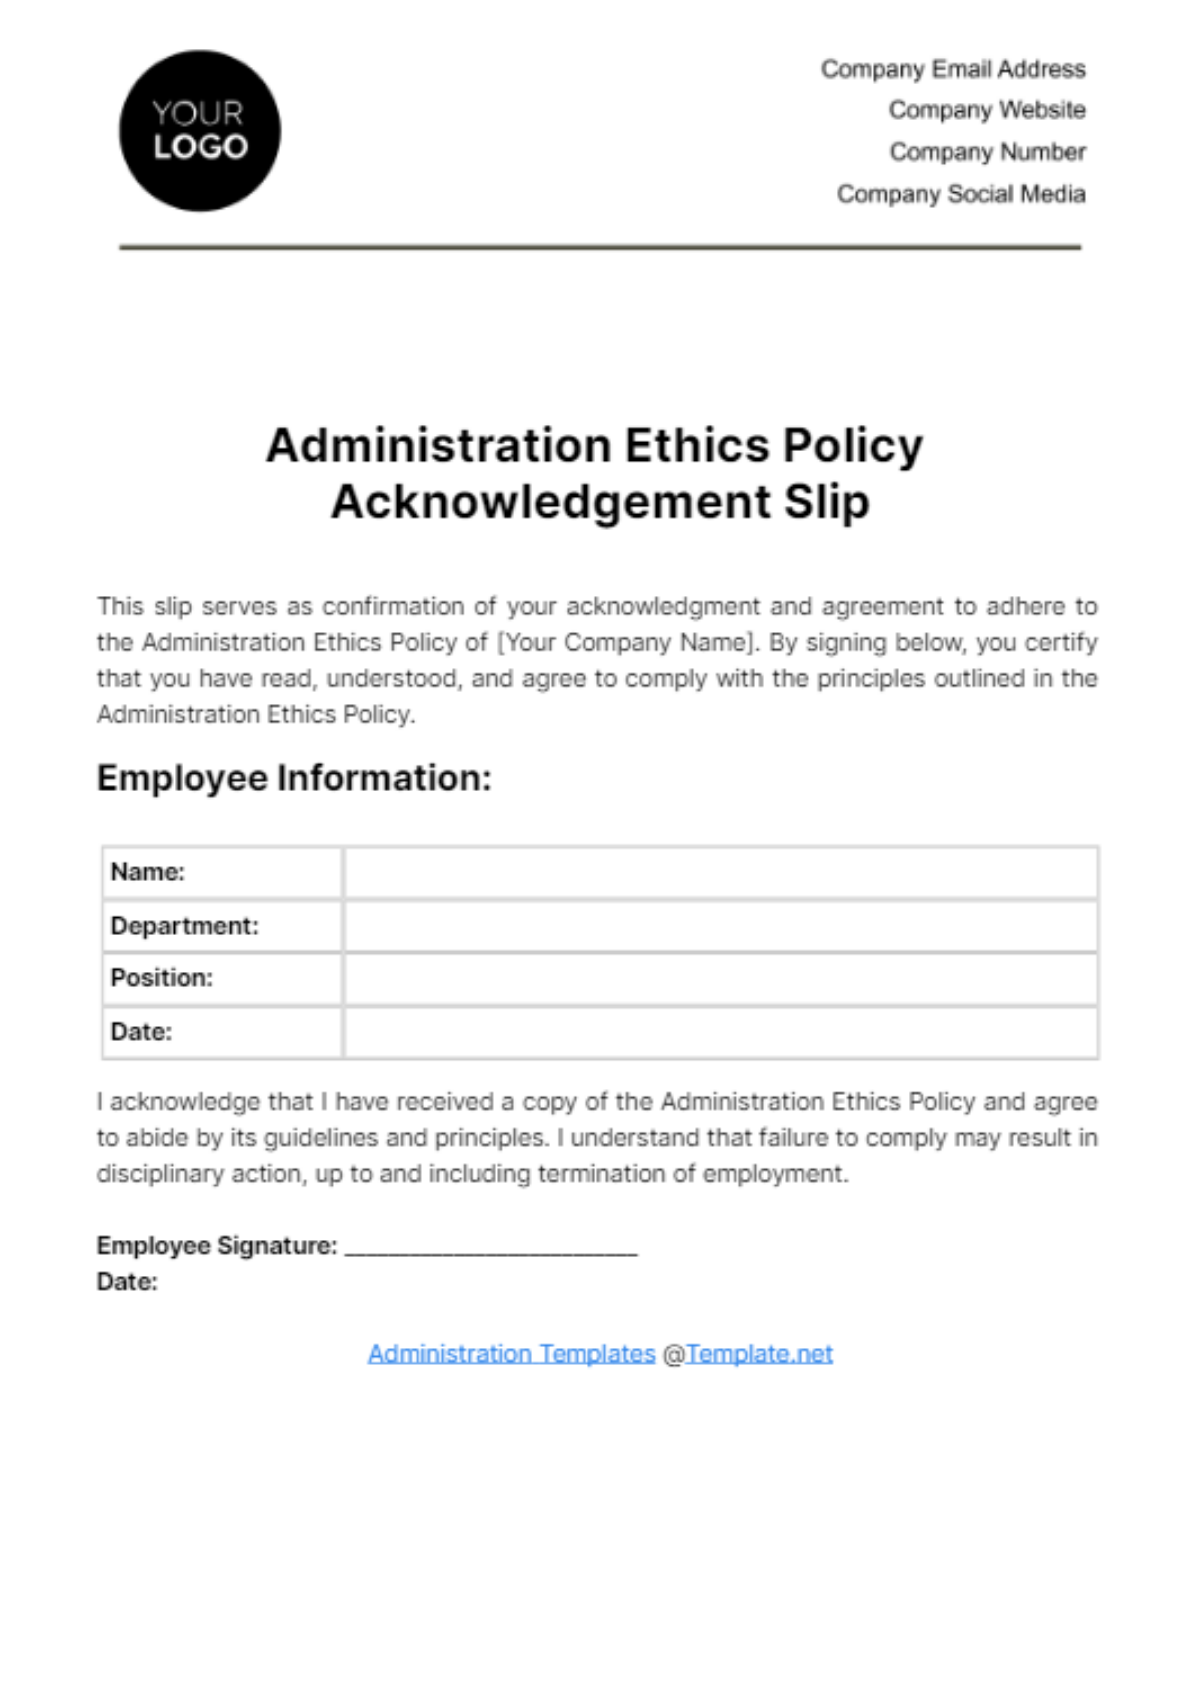 Administration Ethics Policy Acknowledgment Slip Template